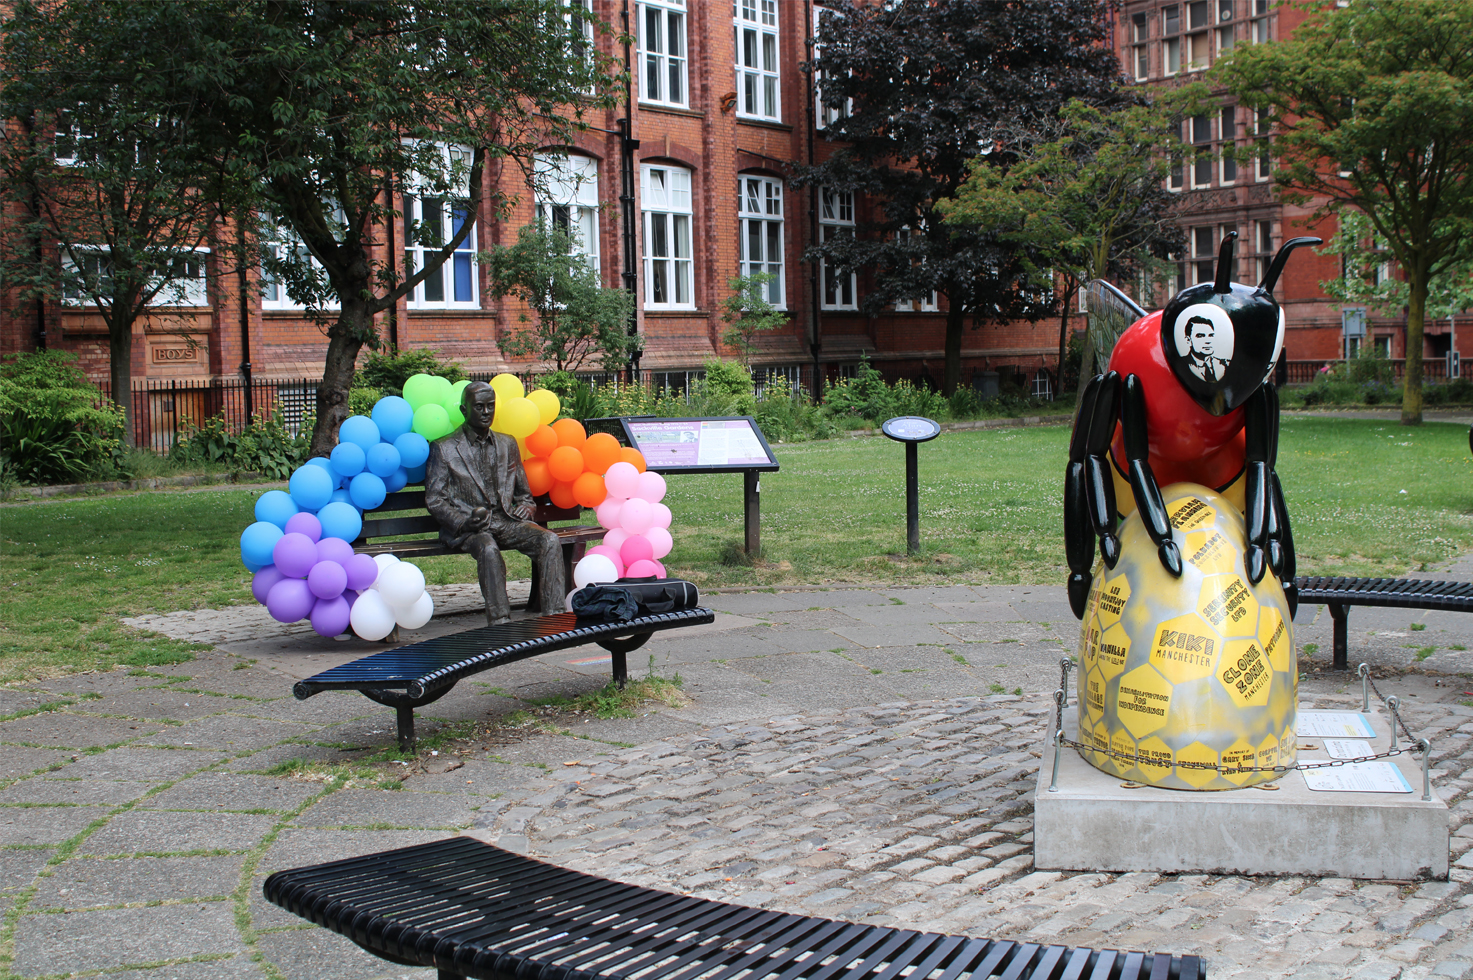 The decorated memorial in Sackville Gardens, photographed besides the LGBTQ+ community bee.